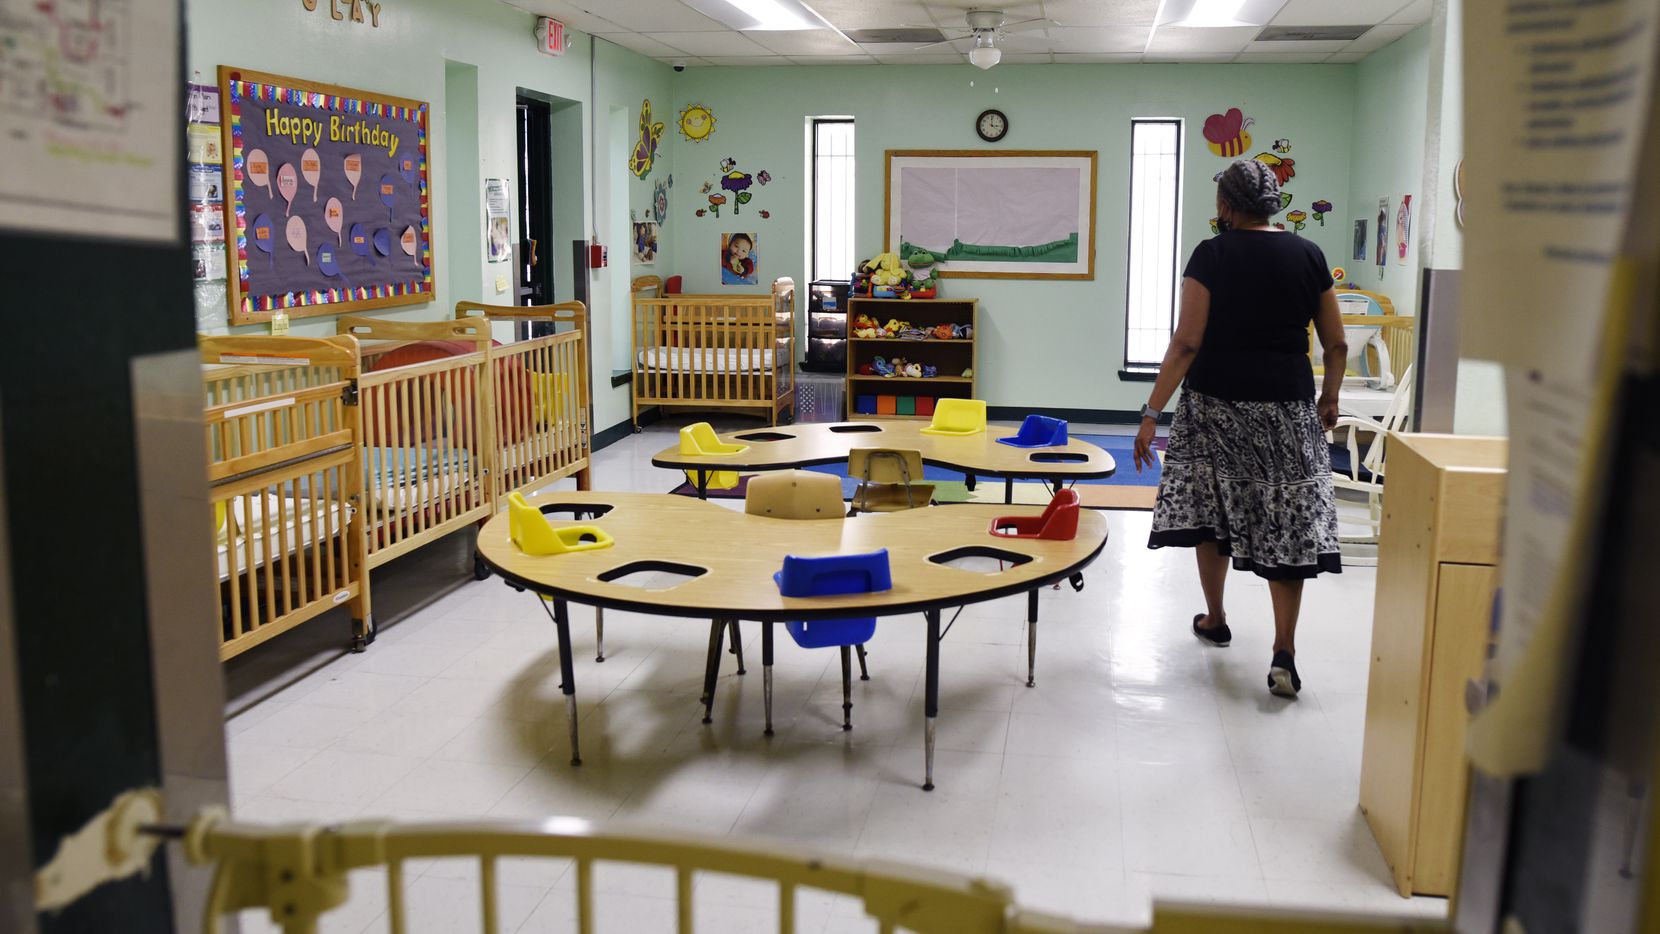 Dr. Ora Watson, owner and director of For Keeps Sake Child Care Academy, walks through an empty infant classroom at her child care academy in Dallas. On Tuesday the academy had one infant; before the pandemic the infant room catered to 10 kids a day.